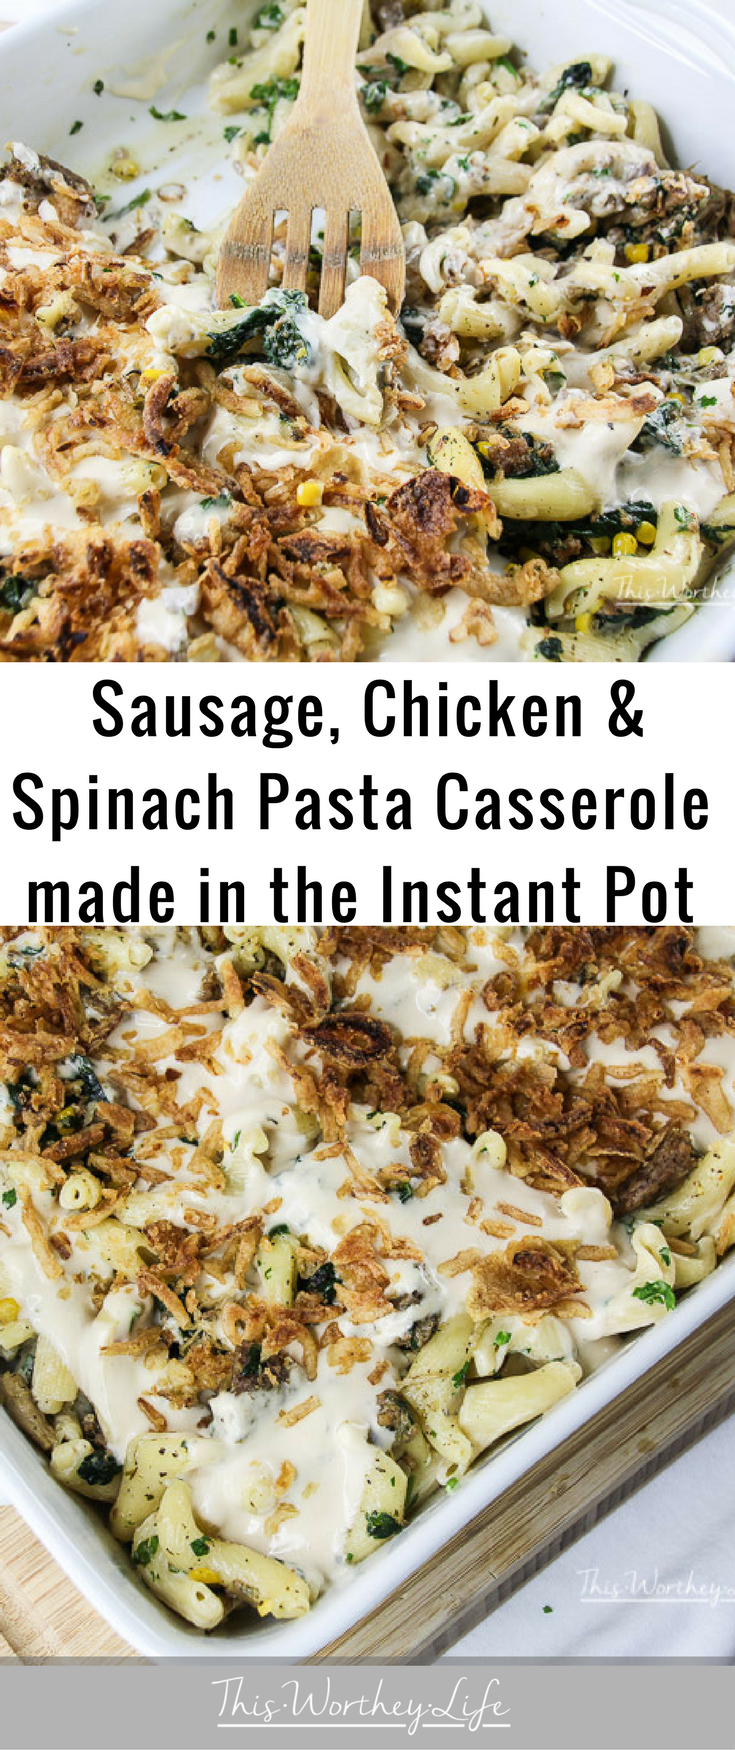 Sometimes you need to get dinner on the table in a jiffy, but what to make? I'm showing you how I take what I have in the fridge/freezer to make dinner in 30 minutes using pasta, sausage, chicken, and our Instant Pot. Get the recipe How To Make Campanelle Pasta + Sausage, Chicken & Spinach In The Instant Pot on the blog!